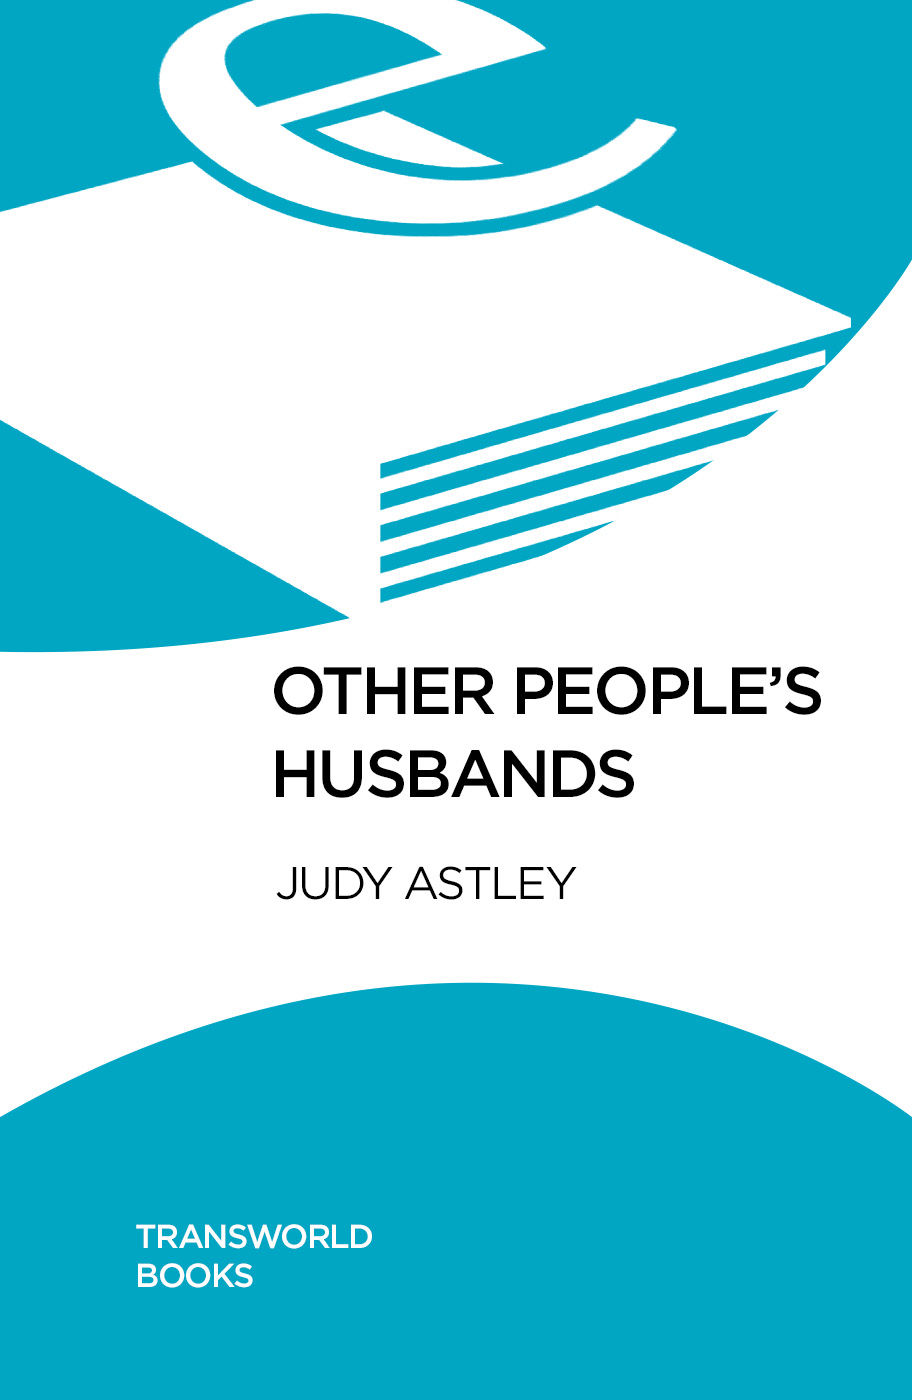 Other People's Husbands